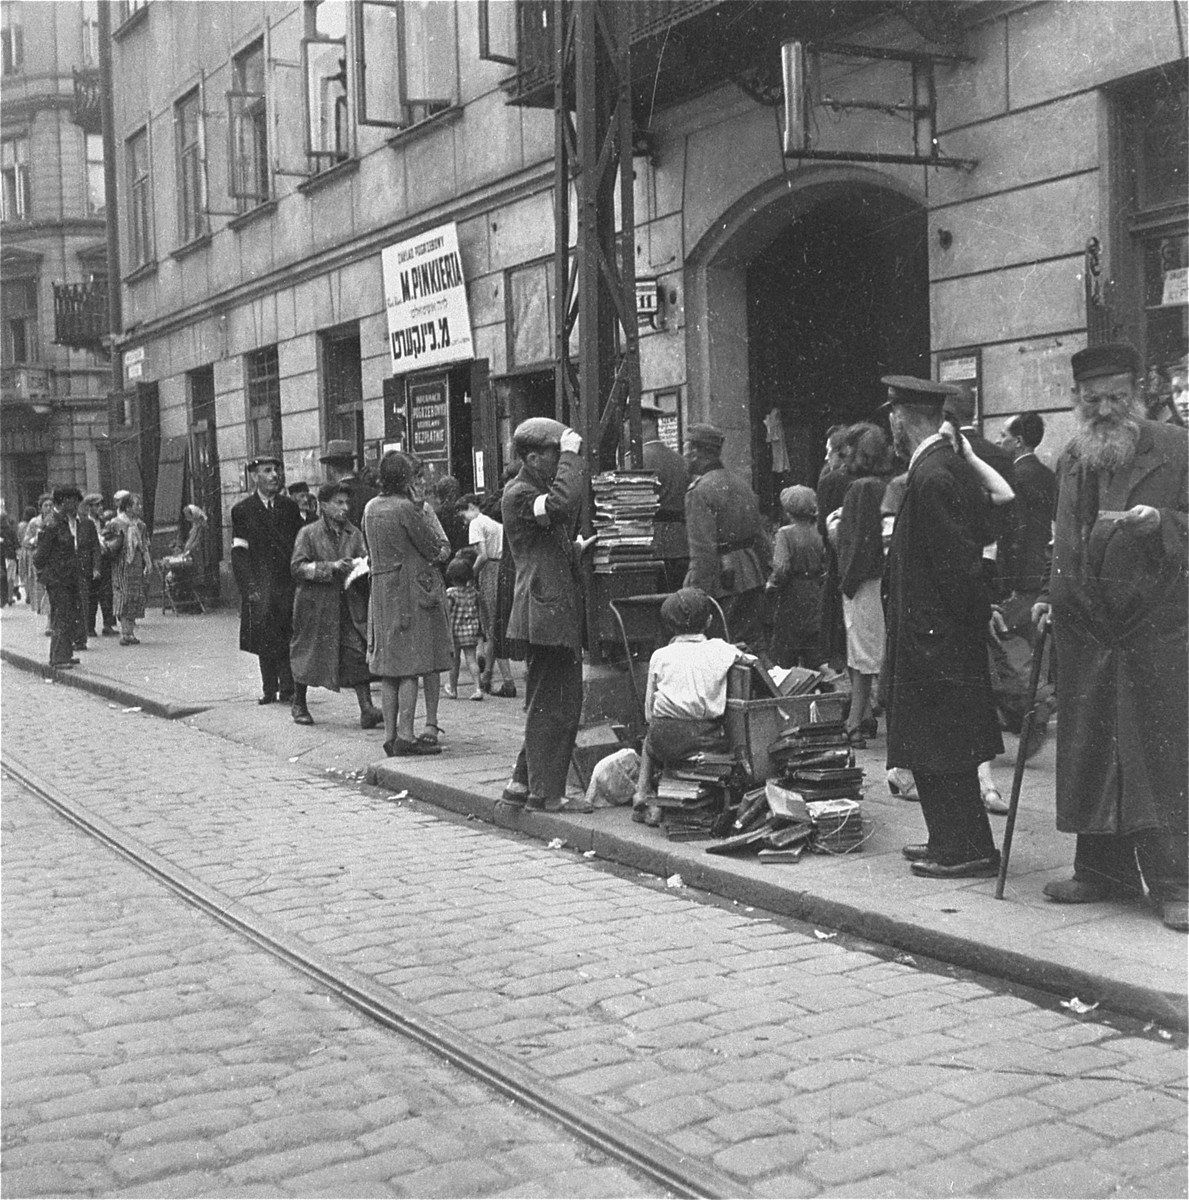 A vendor sells used books on Nowolipiki Street near the undertaker's business of Mordechai Pinkiert.  

Joest's original caption reads: "This was Nowolipiki Street, with the office of an undertaker.  I did not notice the name Mordechai Pinkiert at that time."